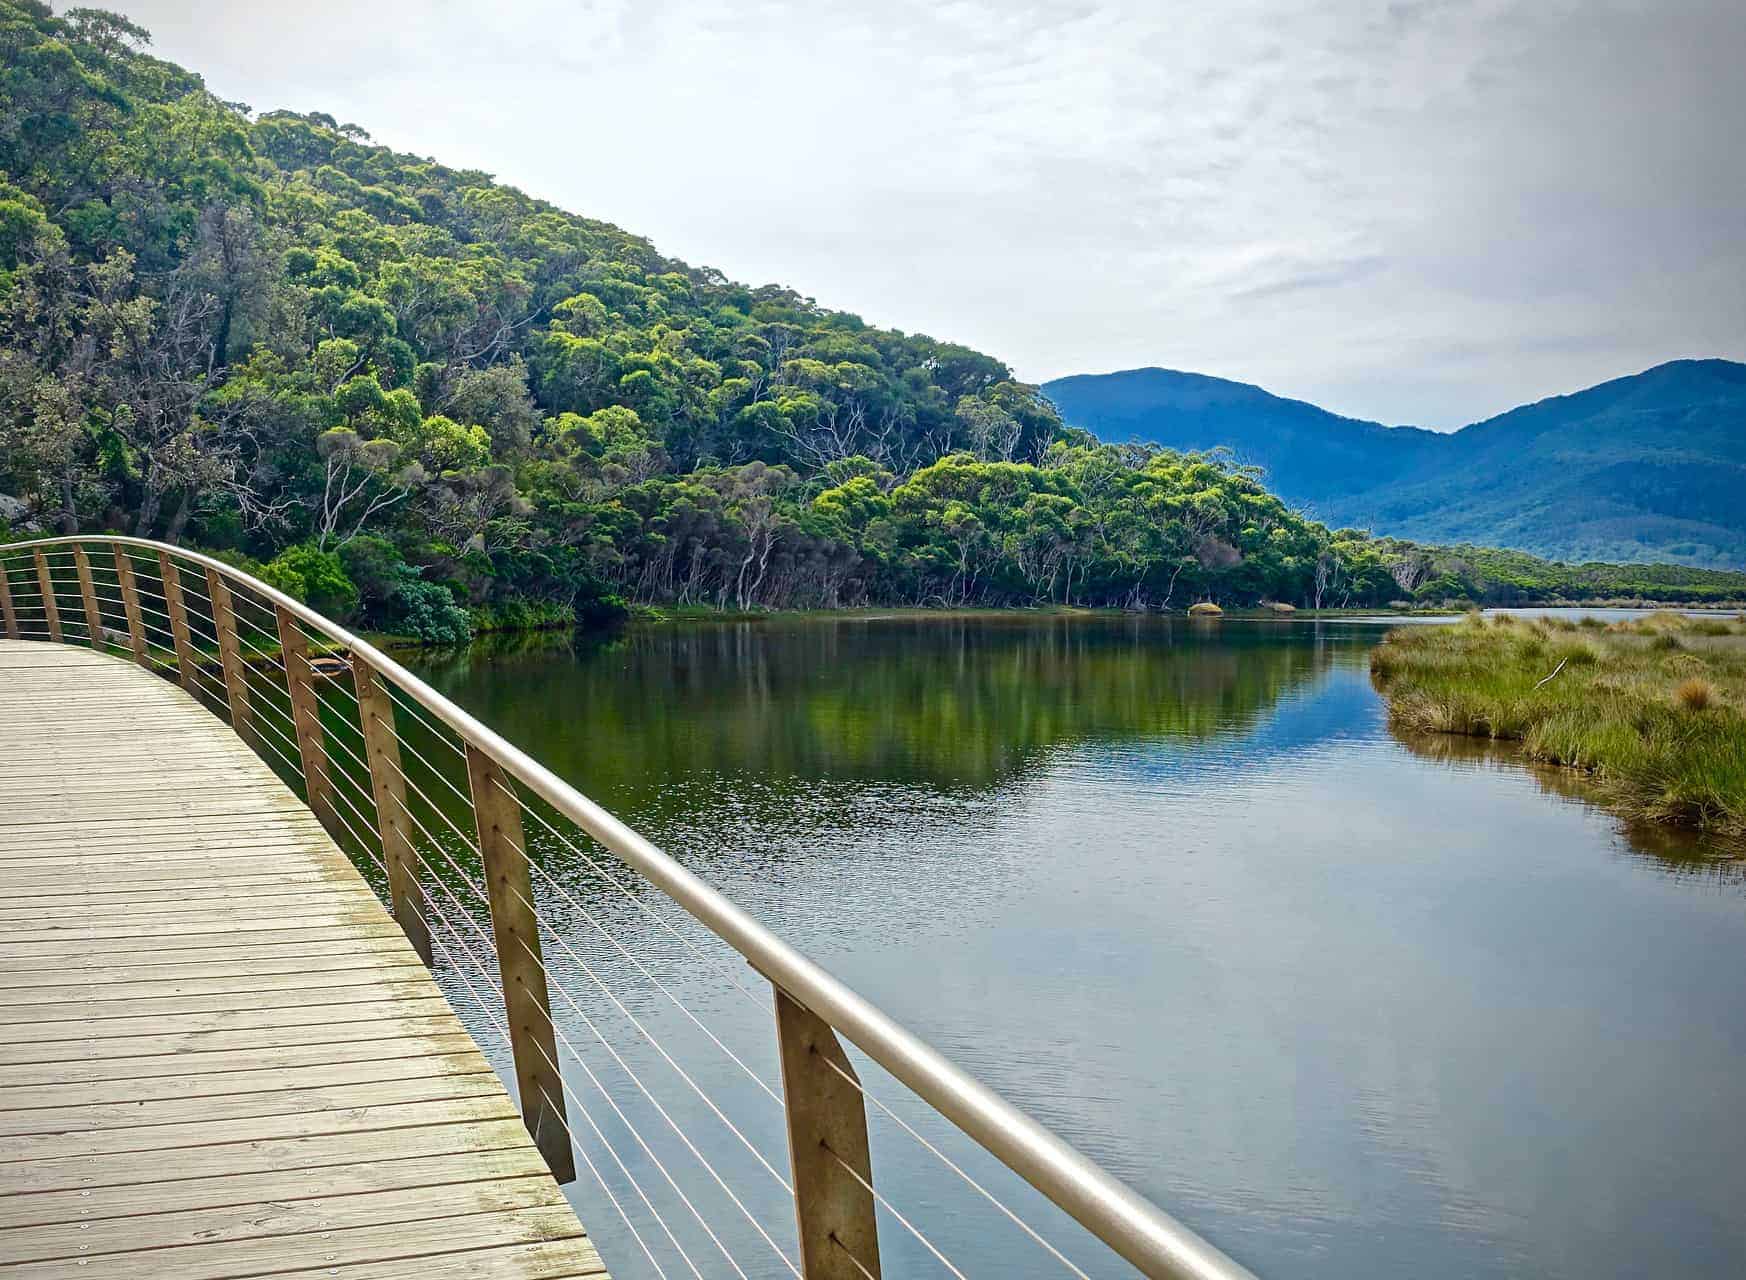 Wilsons Promontory wooden bridge and forest view in Australia